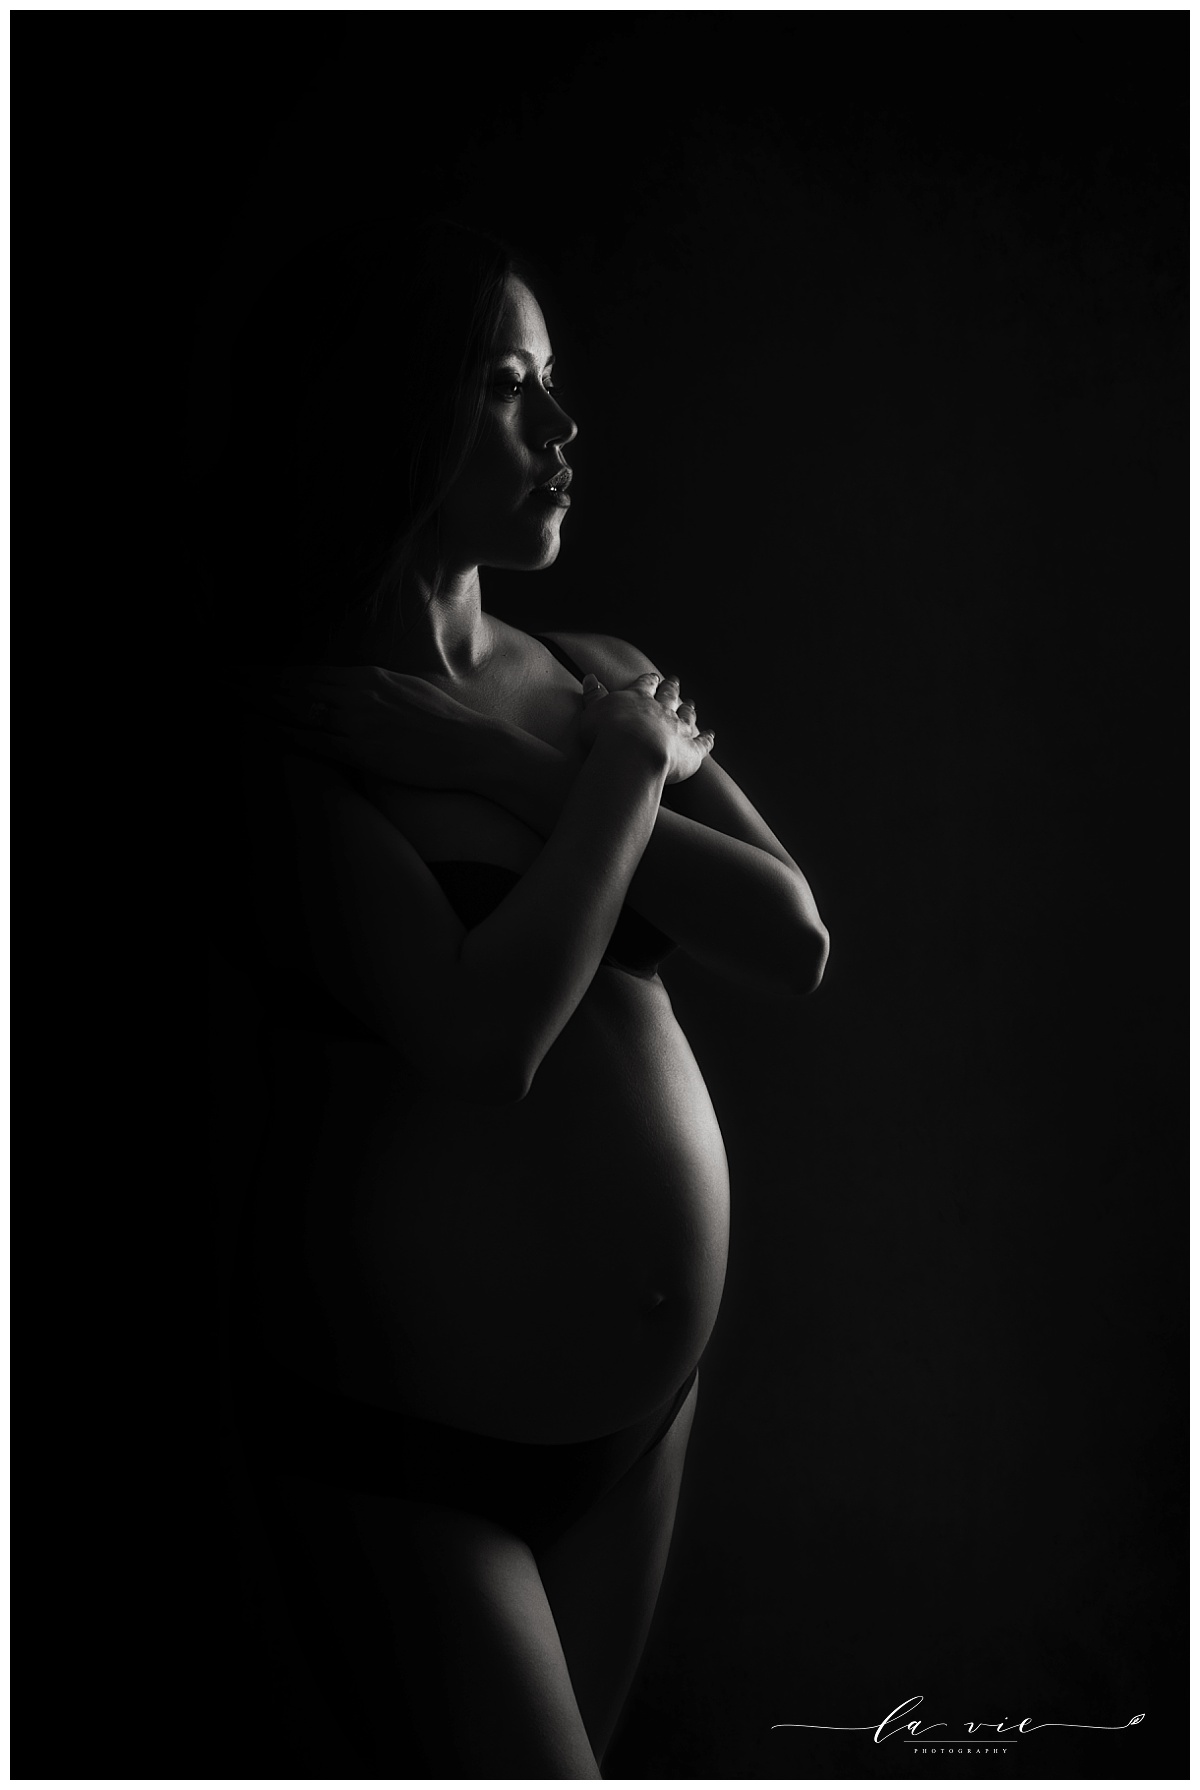 Black and white maternity portrait with dramatic rim lighting